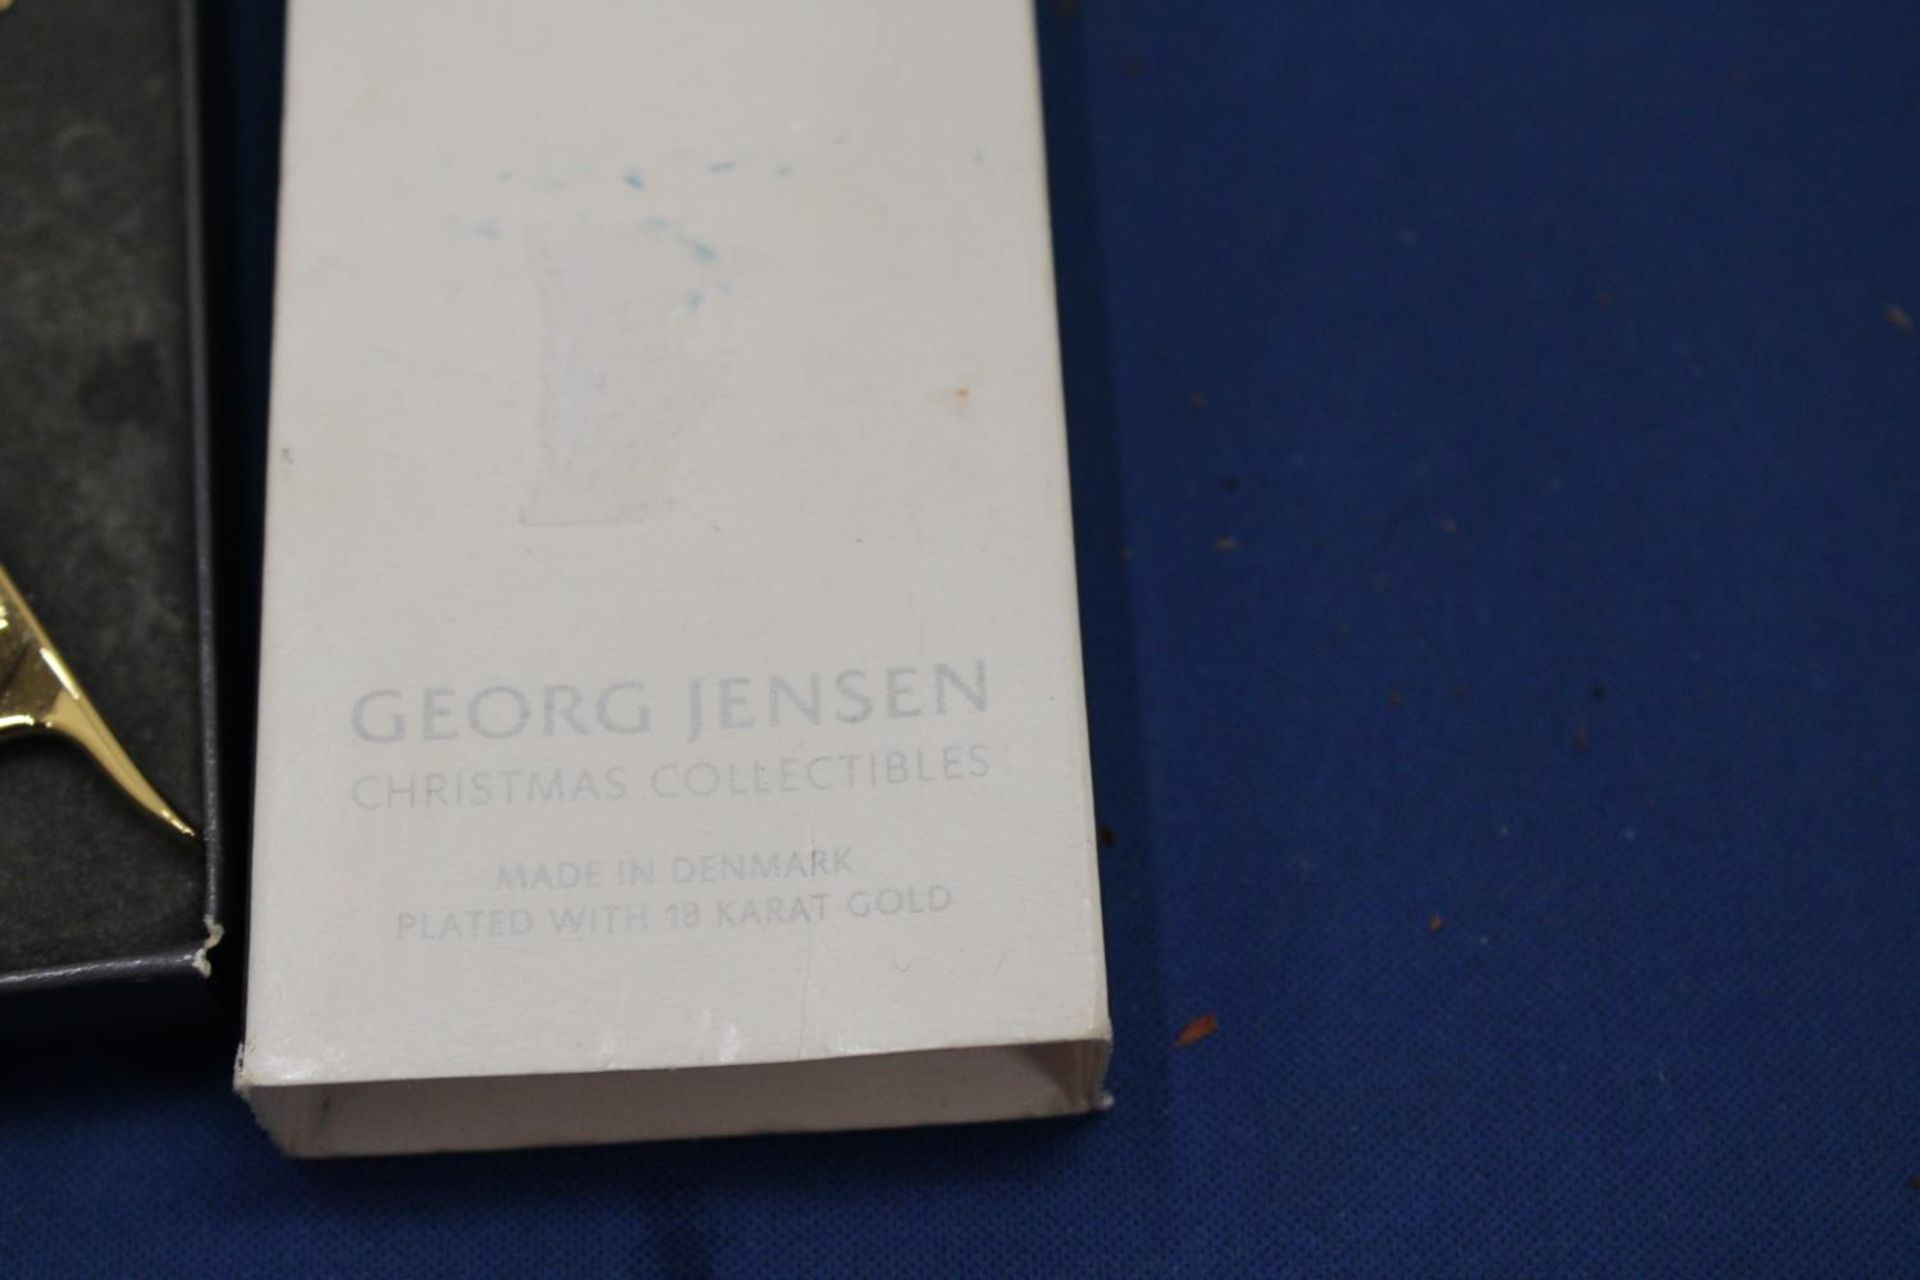 A GEORG JENSON CHRISTMAS COLLECTION 18 KARAT GOLD PLATED ROBIN IN ORIGINAL BOX - Image 3 of 3